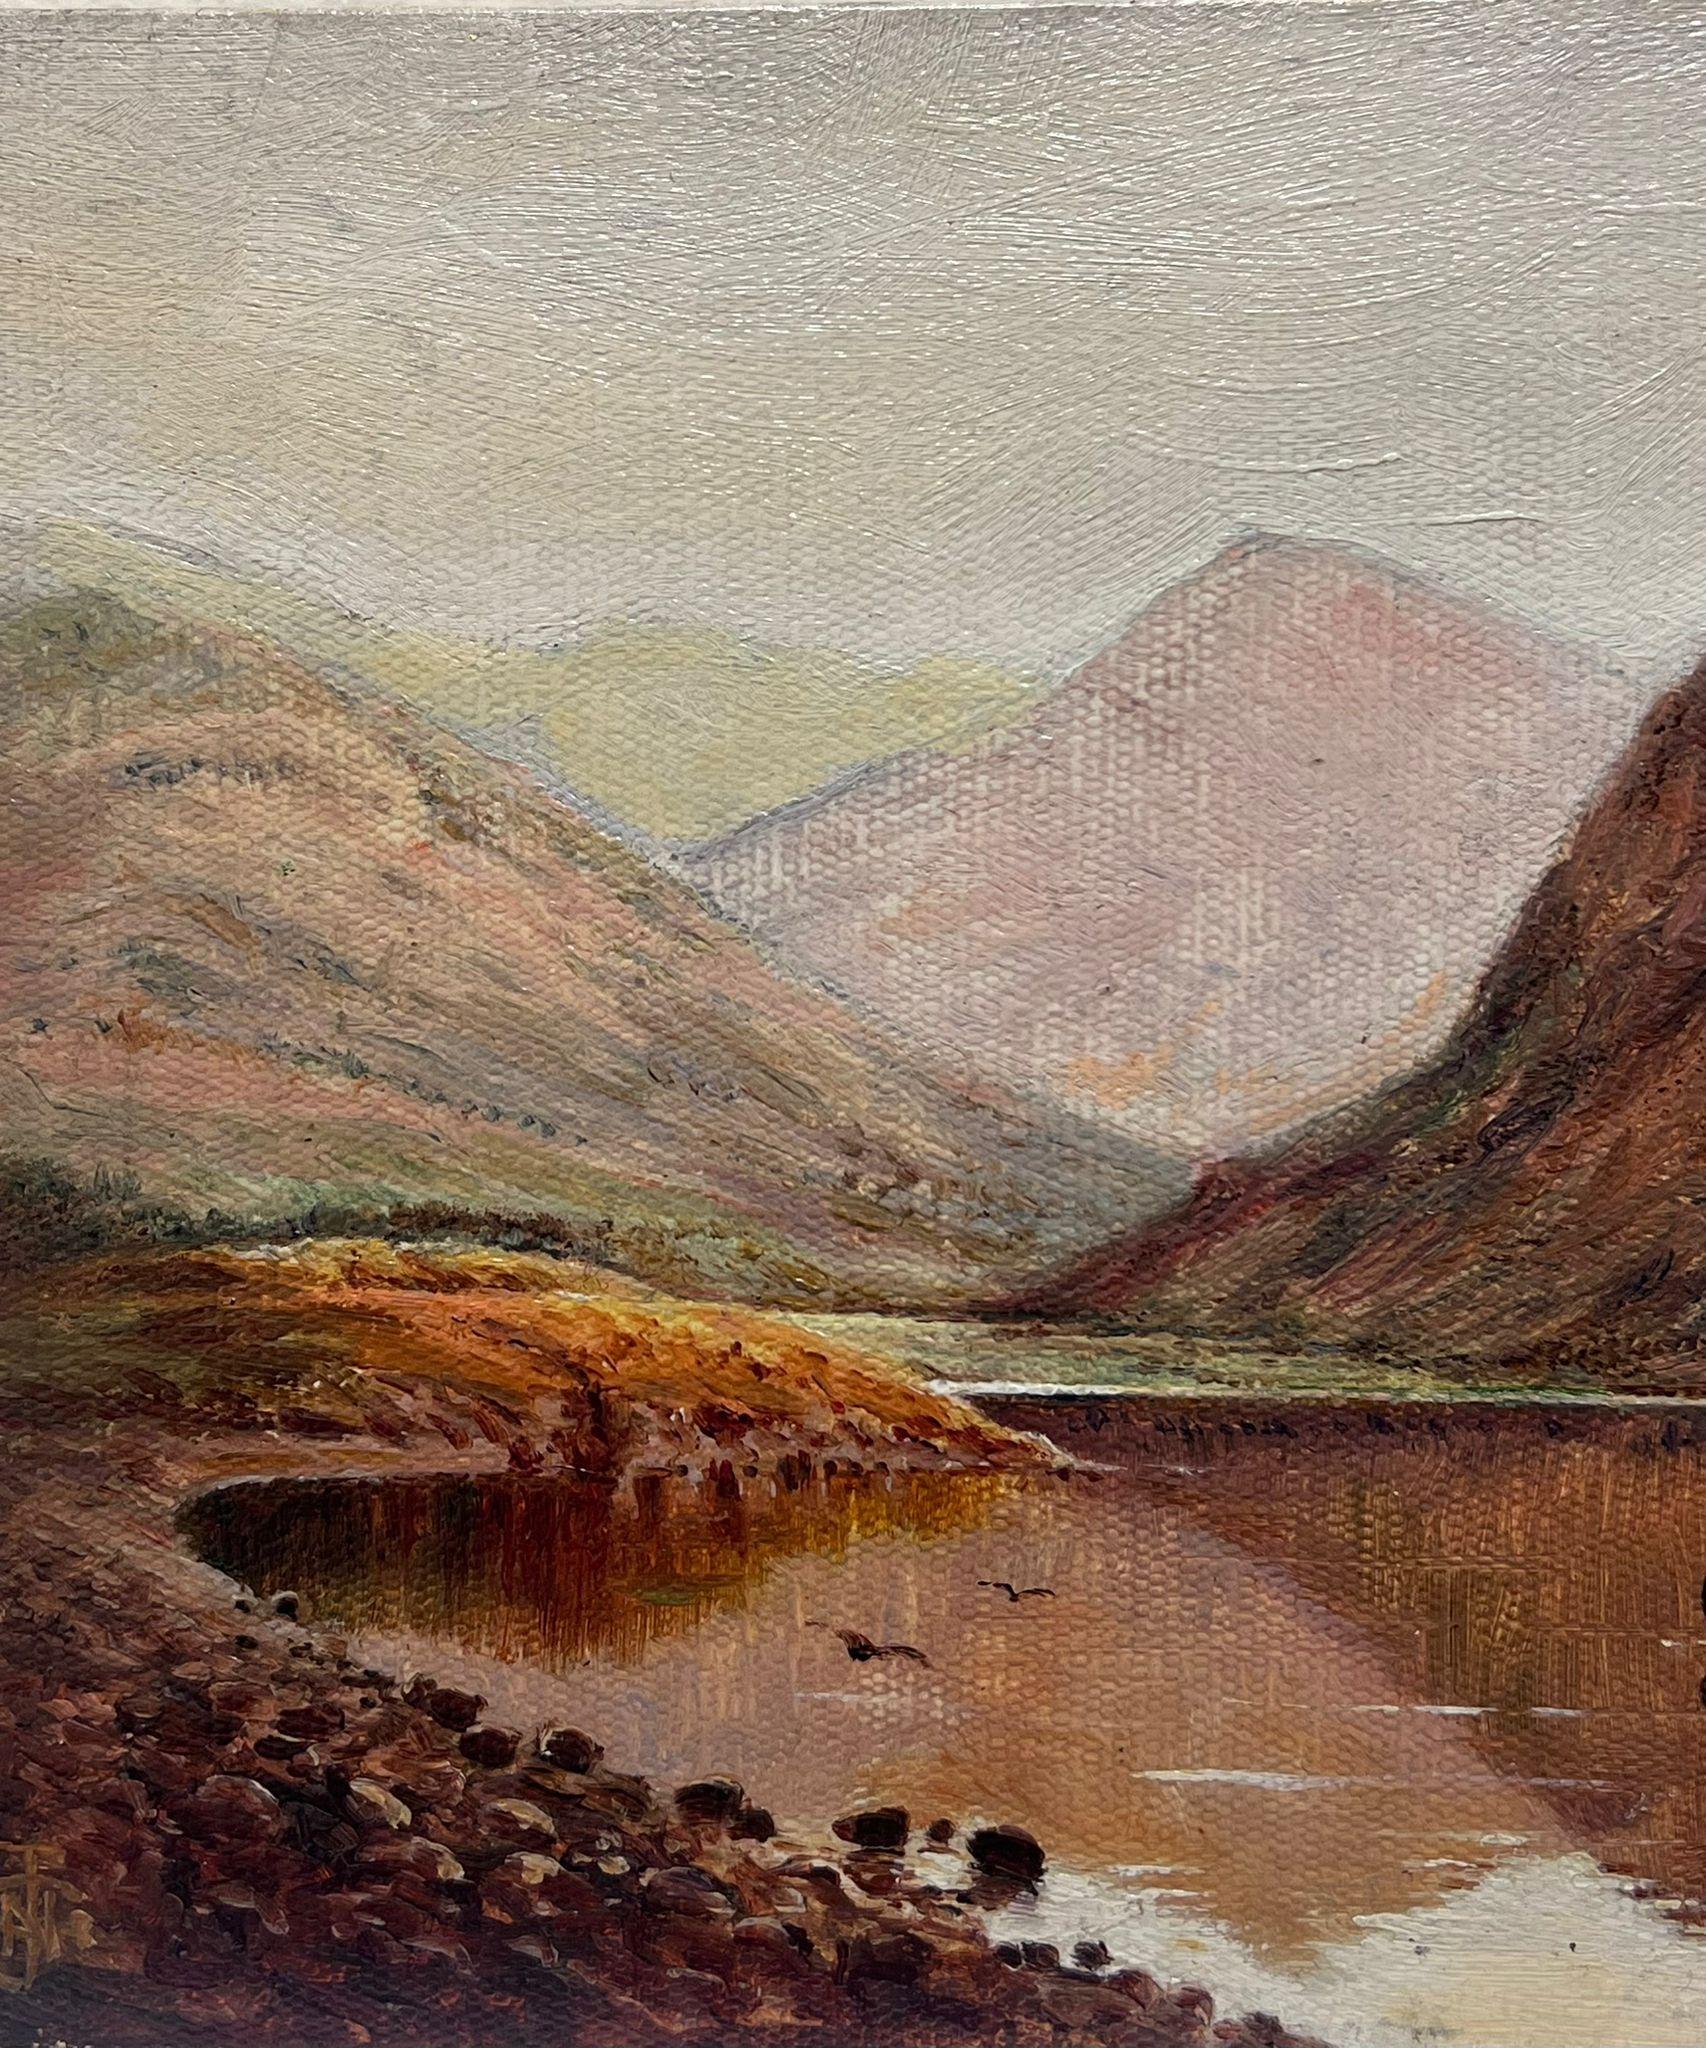 The Highland Loch
British School, early 20th century
signed with initials lower left corner
oil on artists board, unframed
board: 7 x 10 inches
provenance: private collection, UK
condition: very good and sound condition with very minor scuffing to